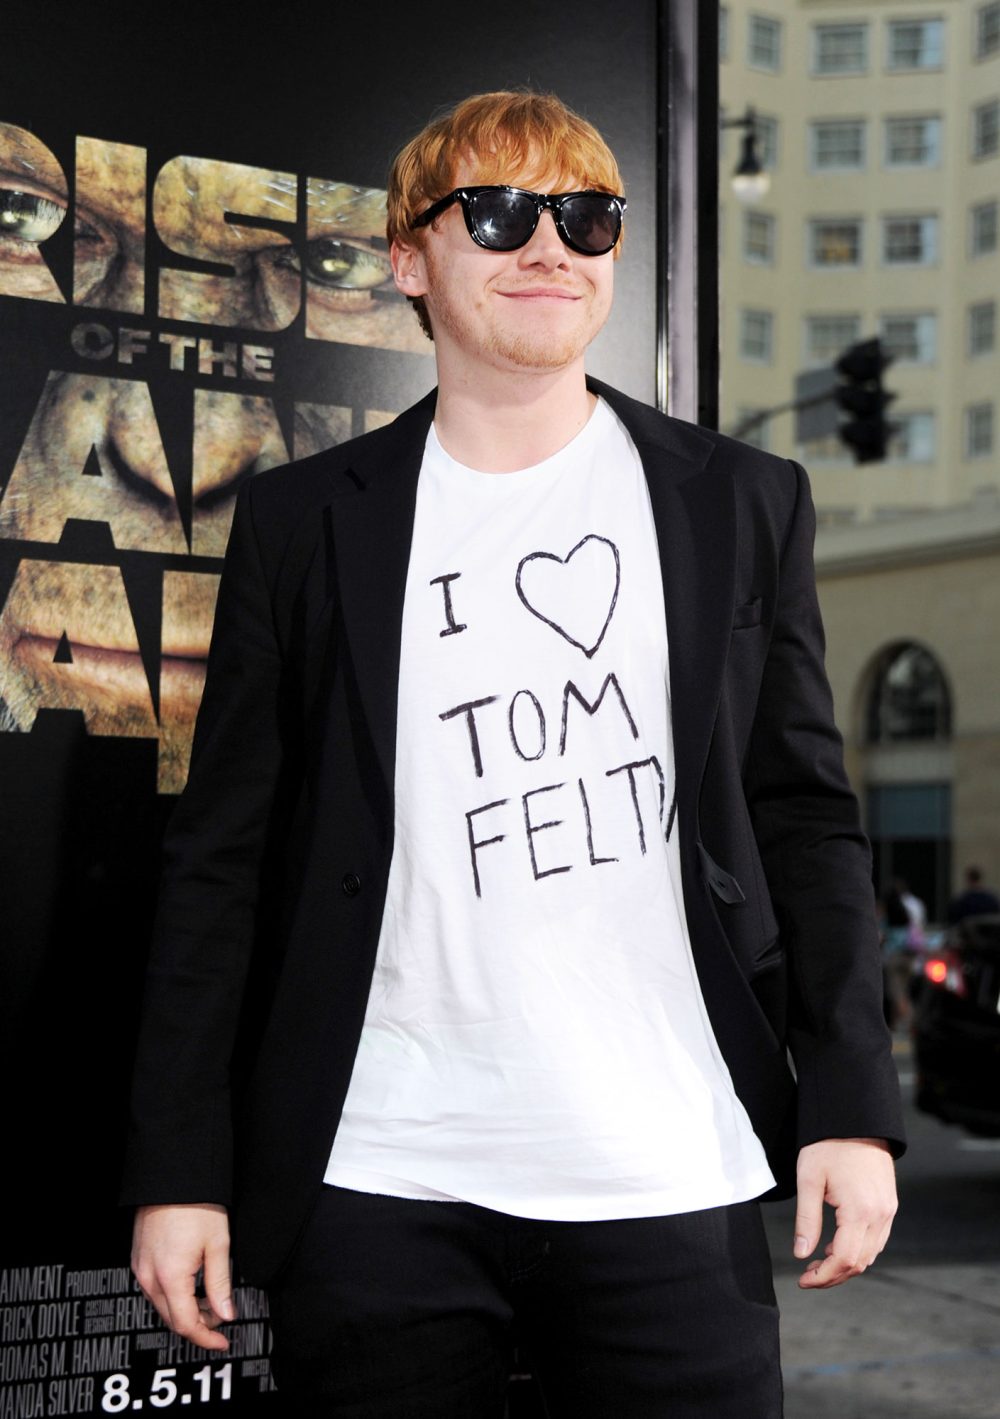 Role Reversal! Tom Felton, Daniel Radcliffe Want to Work Together Again Post-Harry Potter